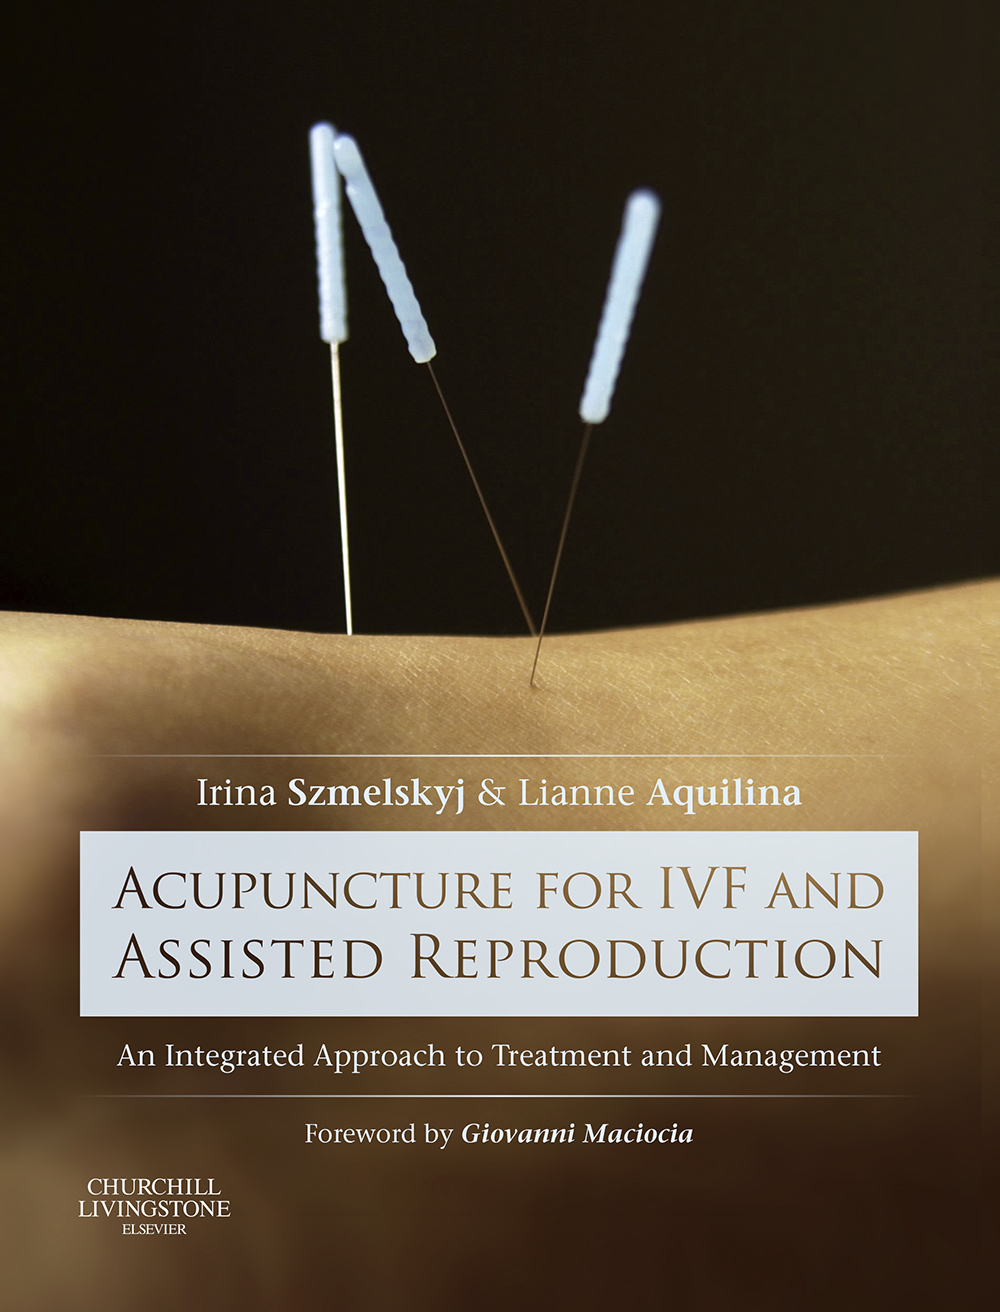 Acupuncture for IVF and Assisted Reproduction - Irina Szmelskyj, Lianne Aquilina, Alan Szmelskyj